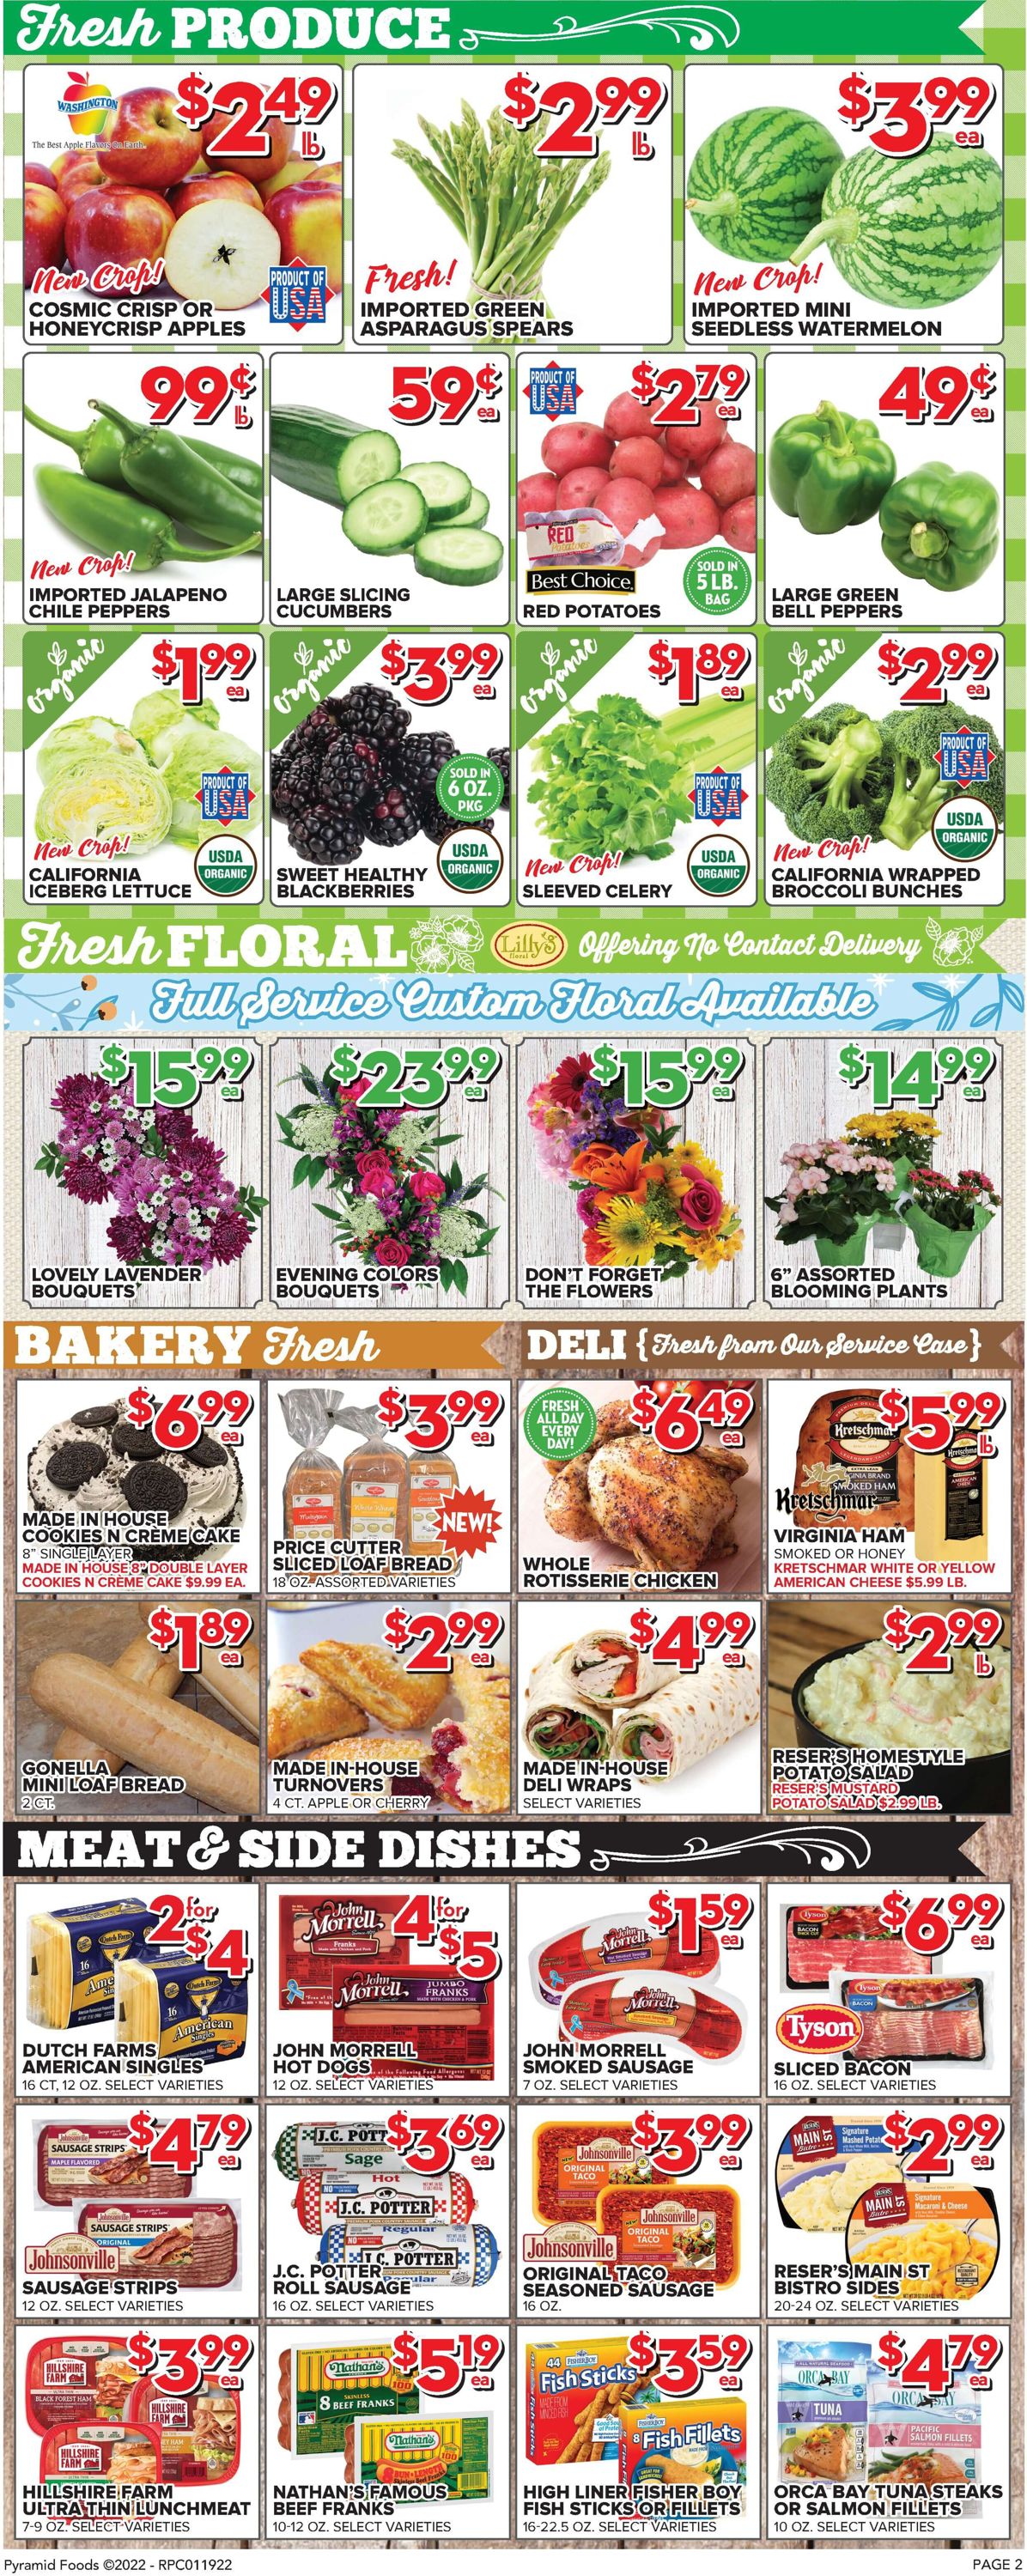 Price Cutter Weekly Ad Circular - valid 01/19-01/25/2022 (Page 2)